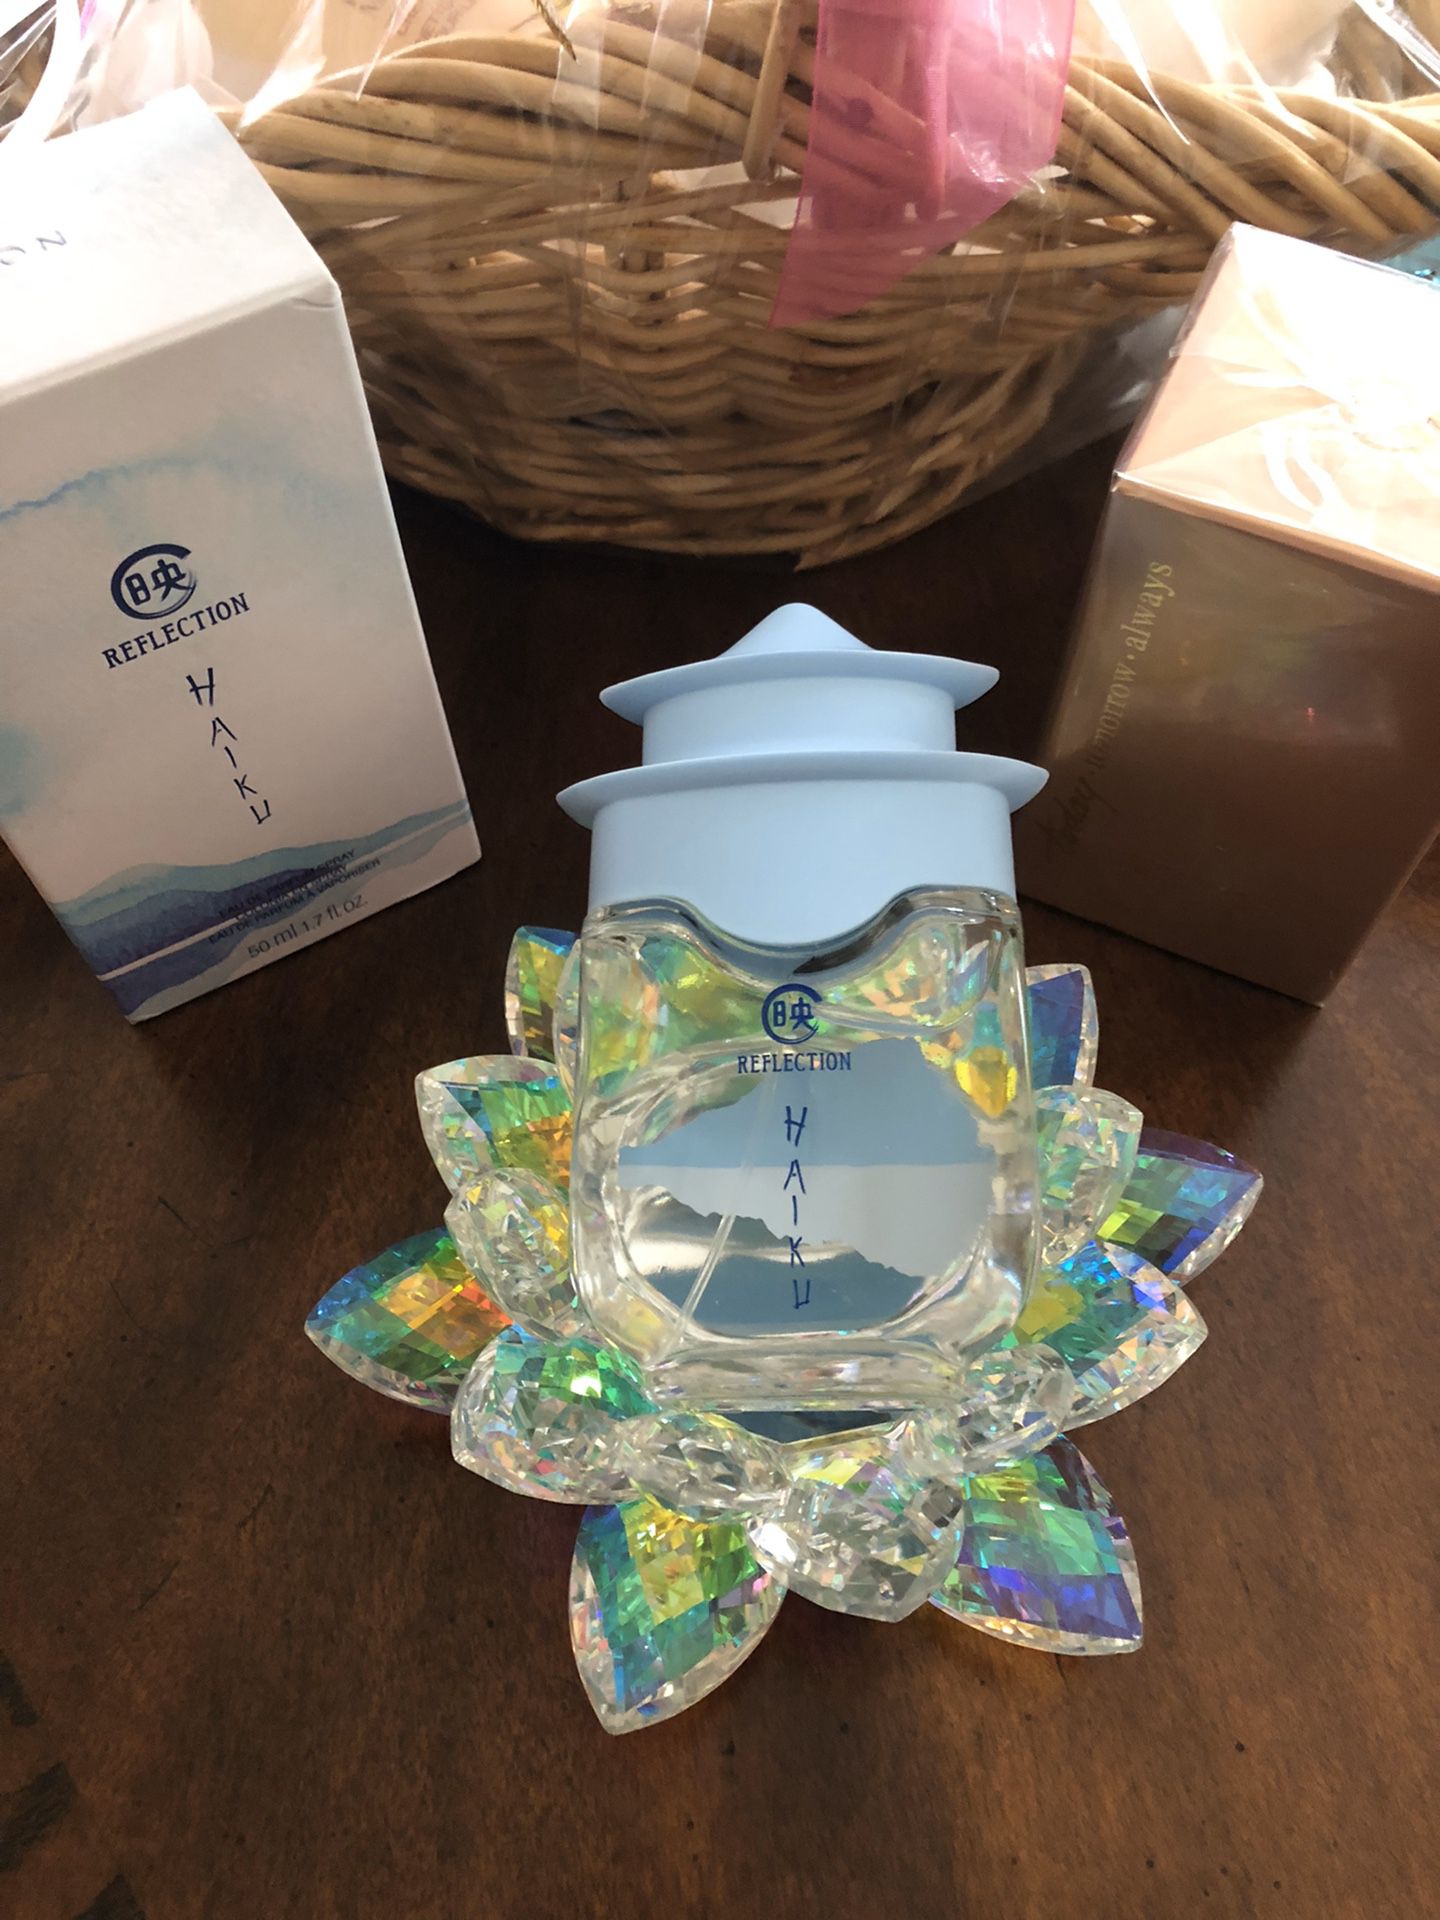 New perfume and gift bag- Great last minute gift for mom. $15